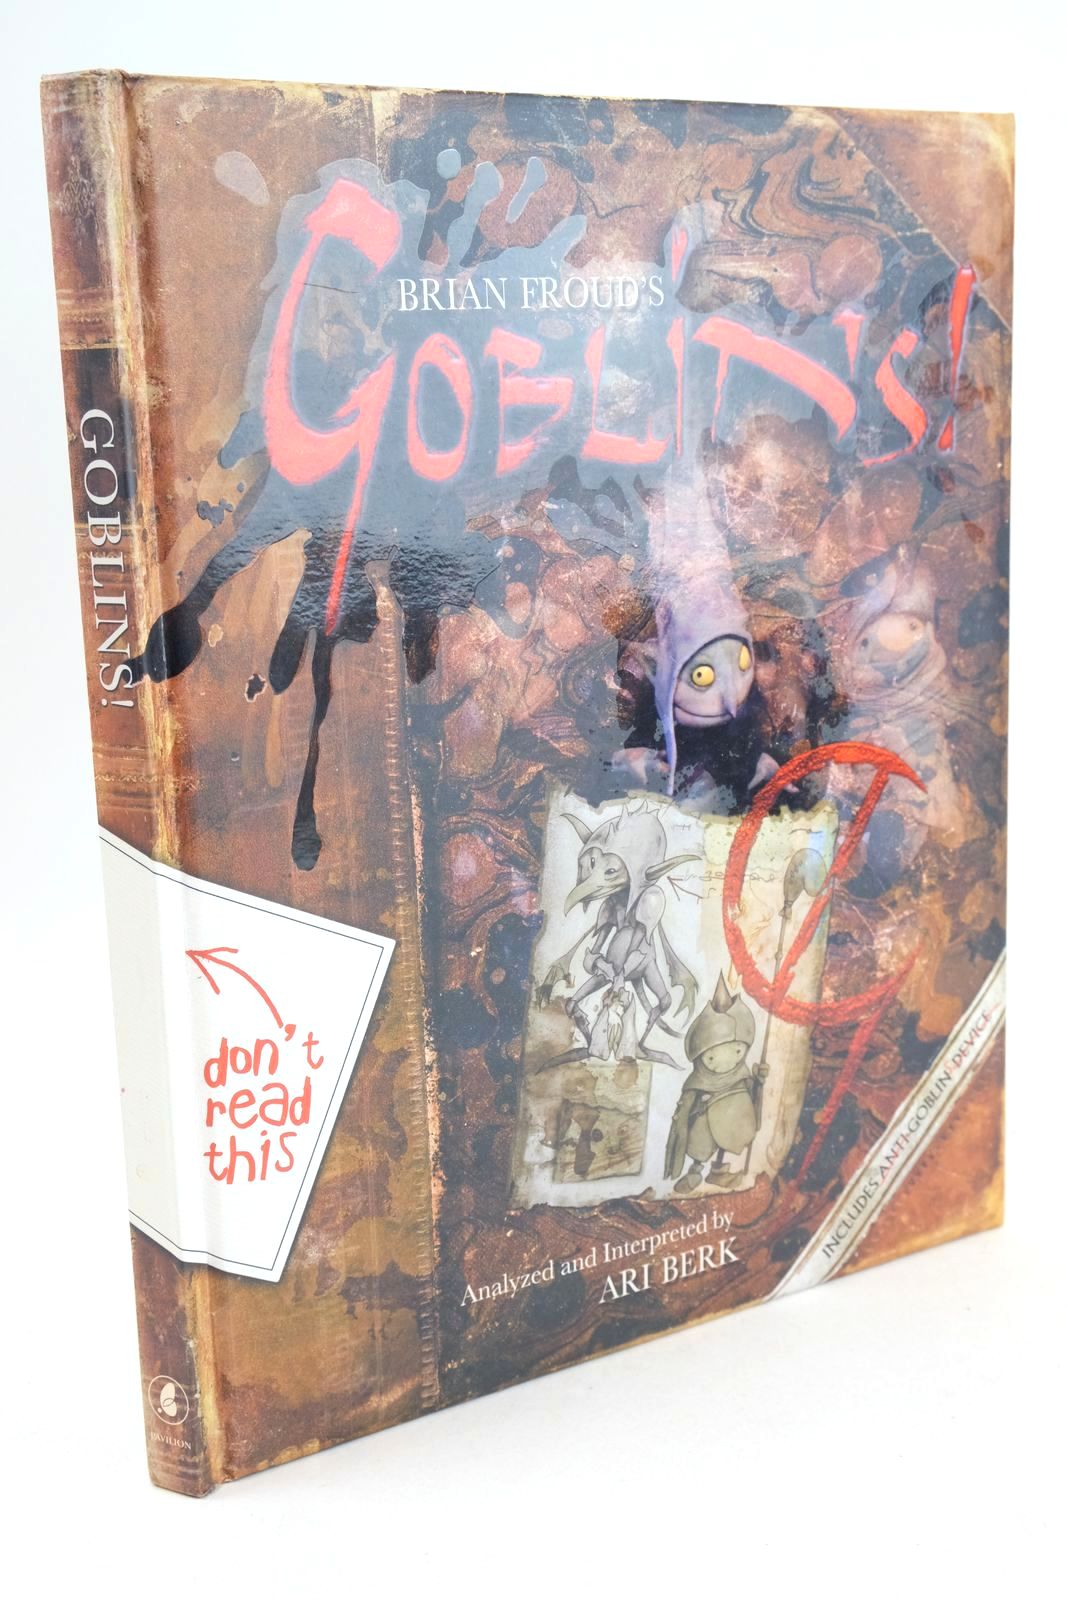 Photo of GOBLINS! A SURVIVAL GUIDE AND GIASCO IN FOUR PARTS written by Berk, Ari illustrated by Froud, Brian Froud, Wendy published by Pavilion Books (STOCK CODE: 1326002)  for sale by Stella & Rose's Books